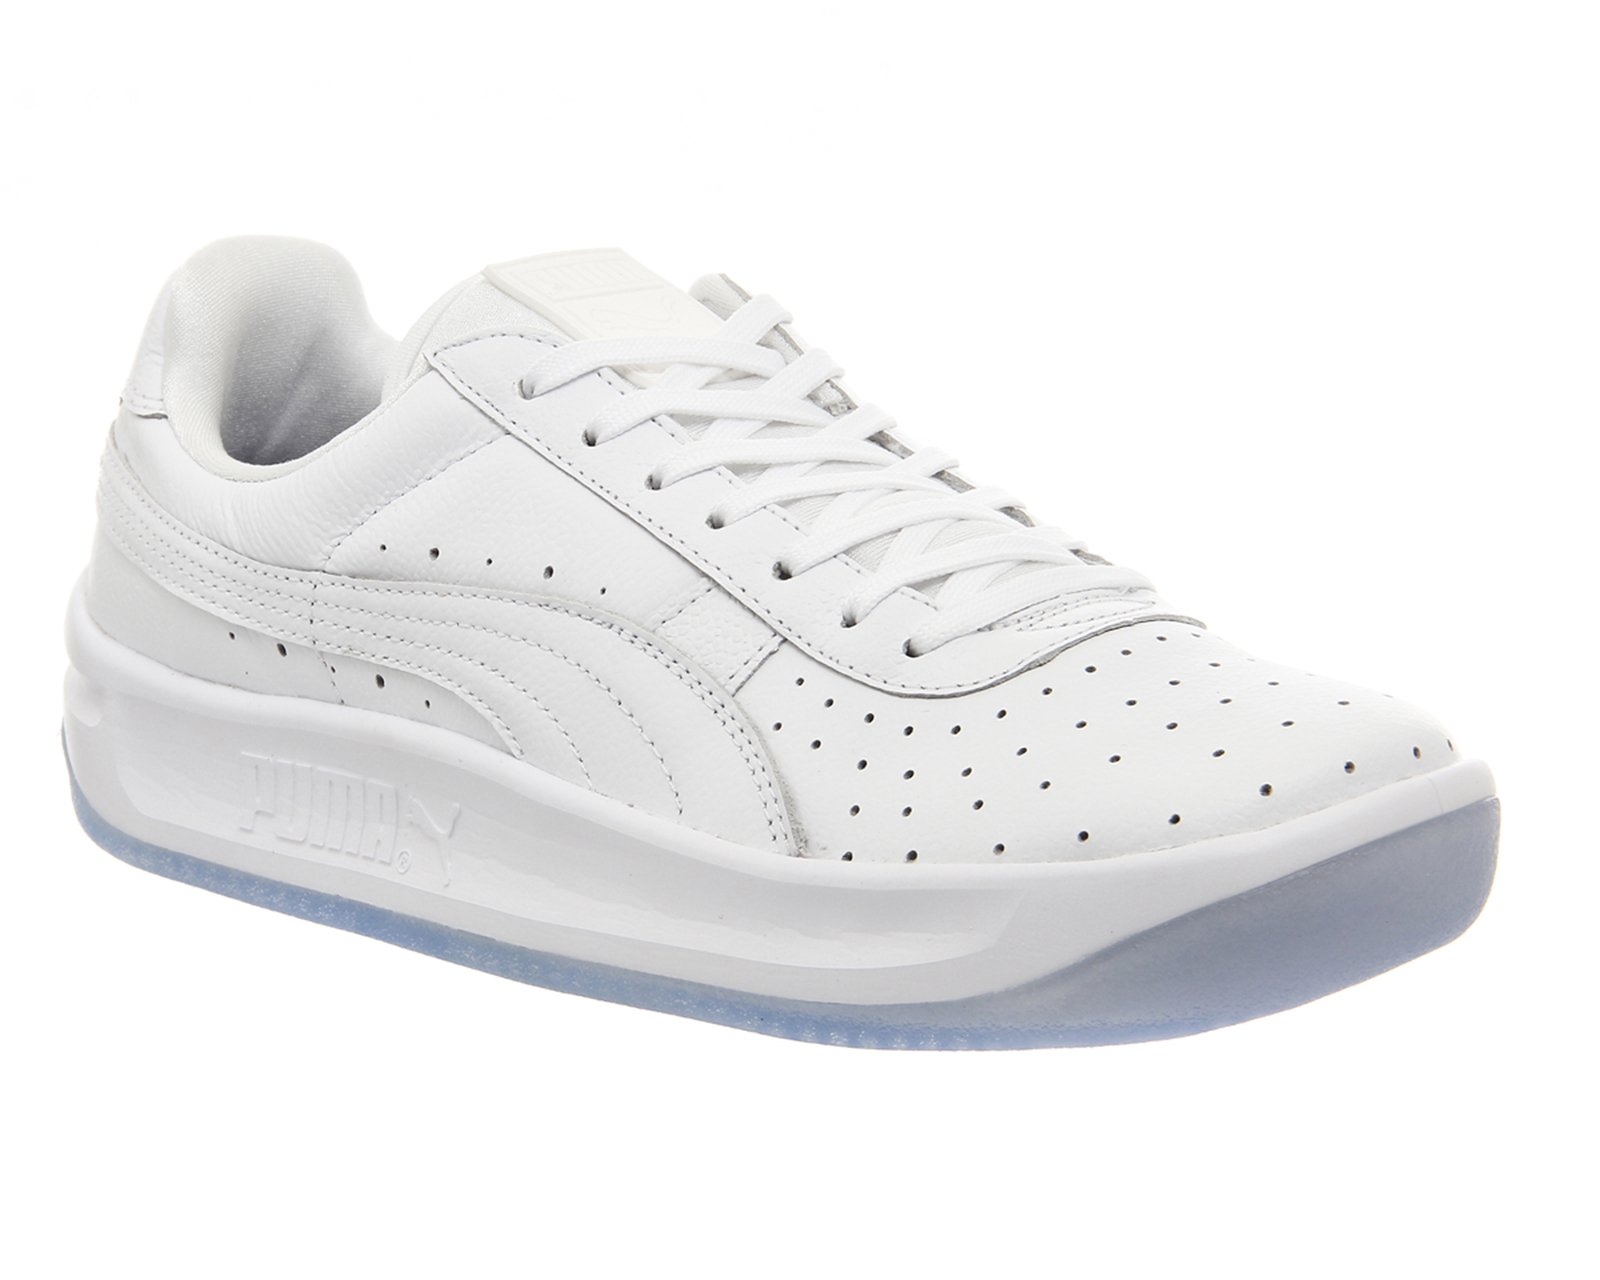 Puma Gv Special White Ice - His trainers